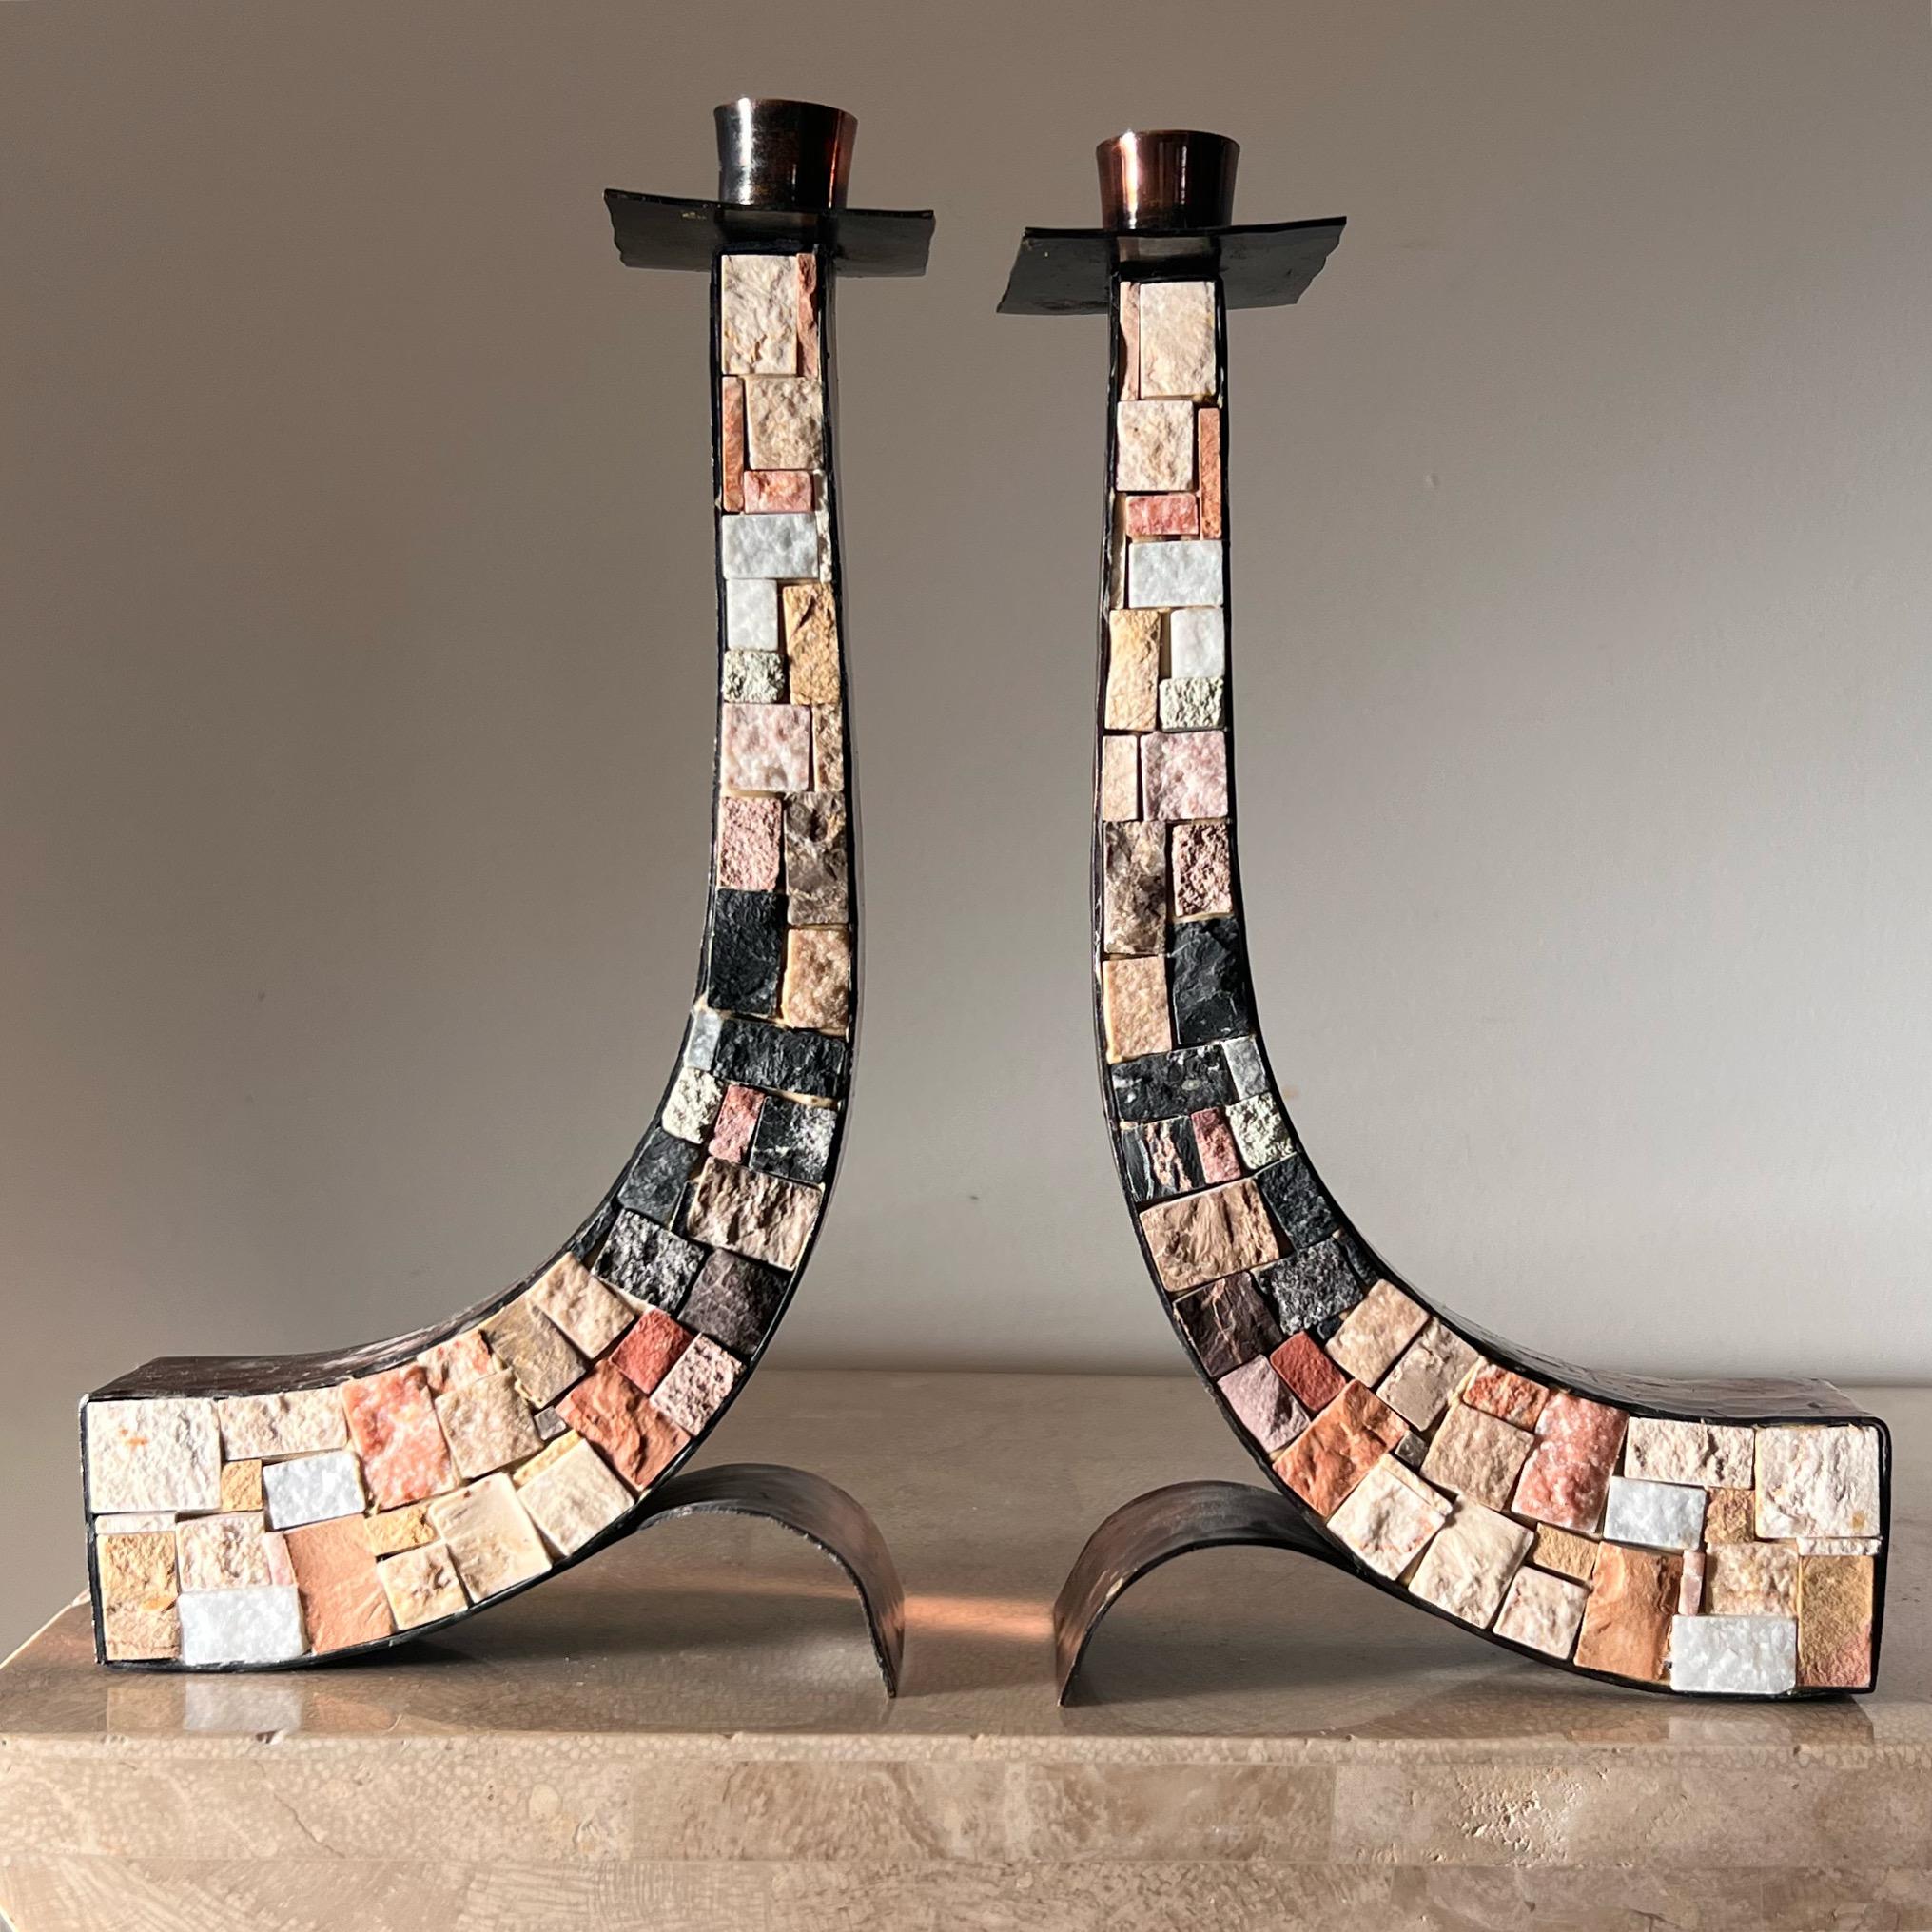 A stunning and unique pair of mid century modern candlesticks with decidedly brutalist sensibilities, circa late 1960s. Hand-worked copper comprises the frames of the candelaria, while a mosaic of stone fragments - limestone, marble, travertine, etc